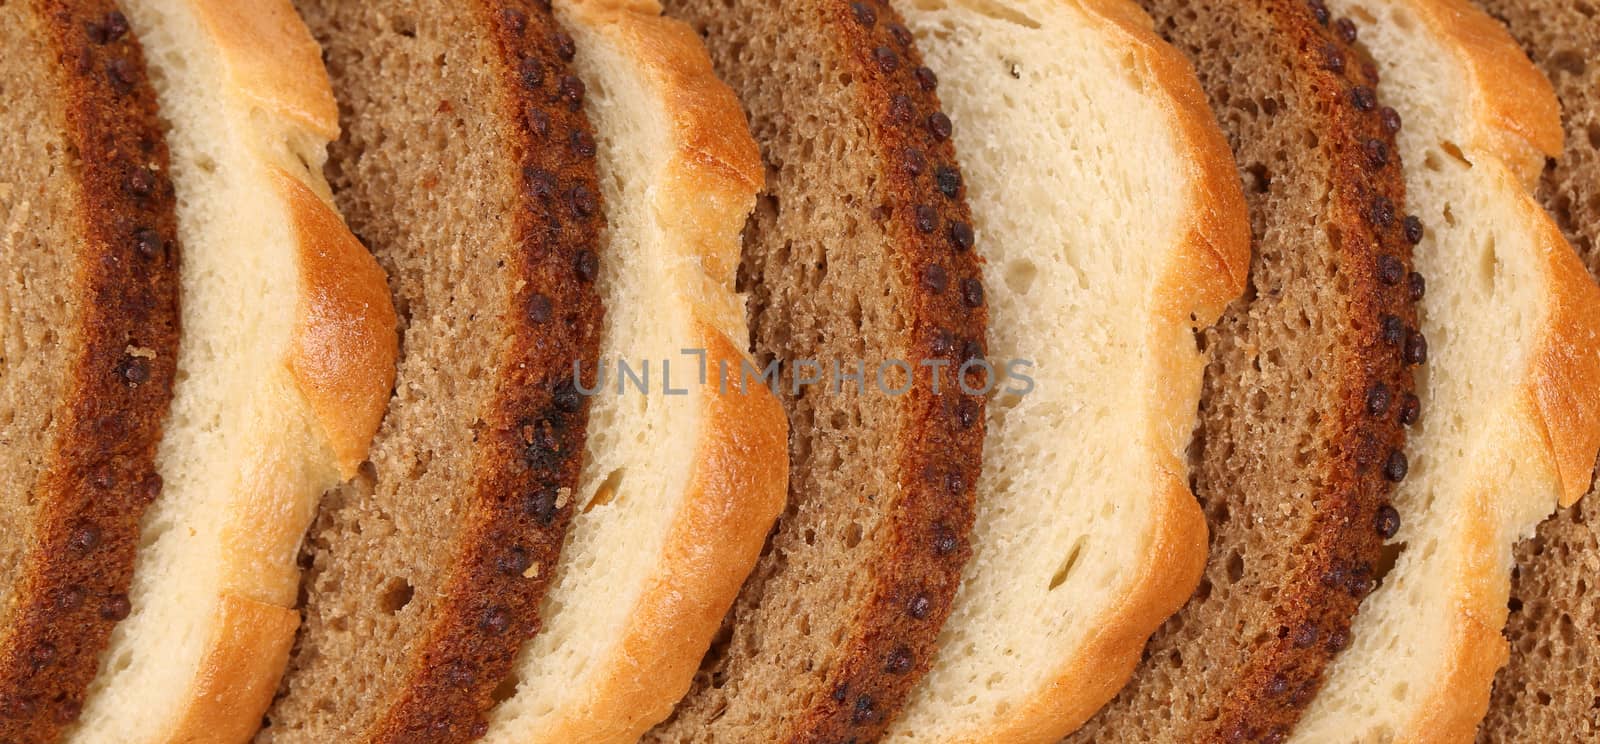 Sliced white and brown loaf of bread. by indigolotos